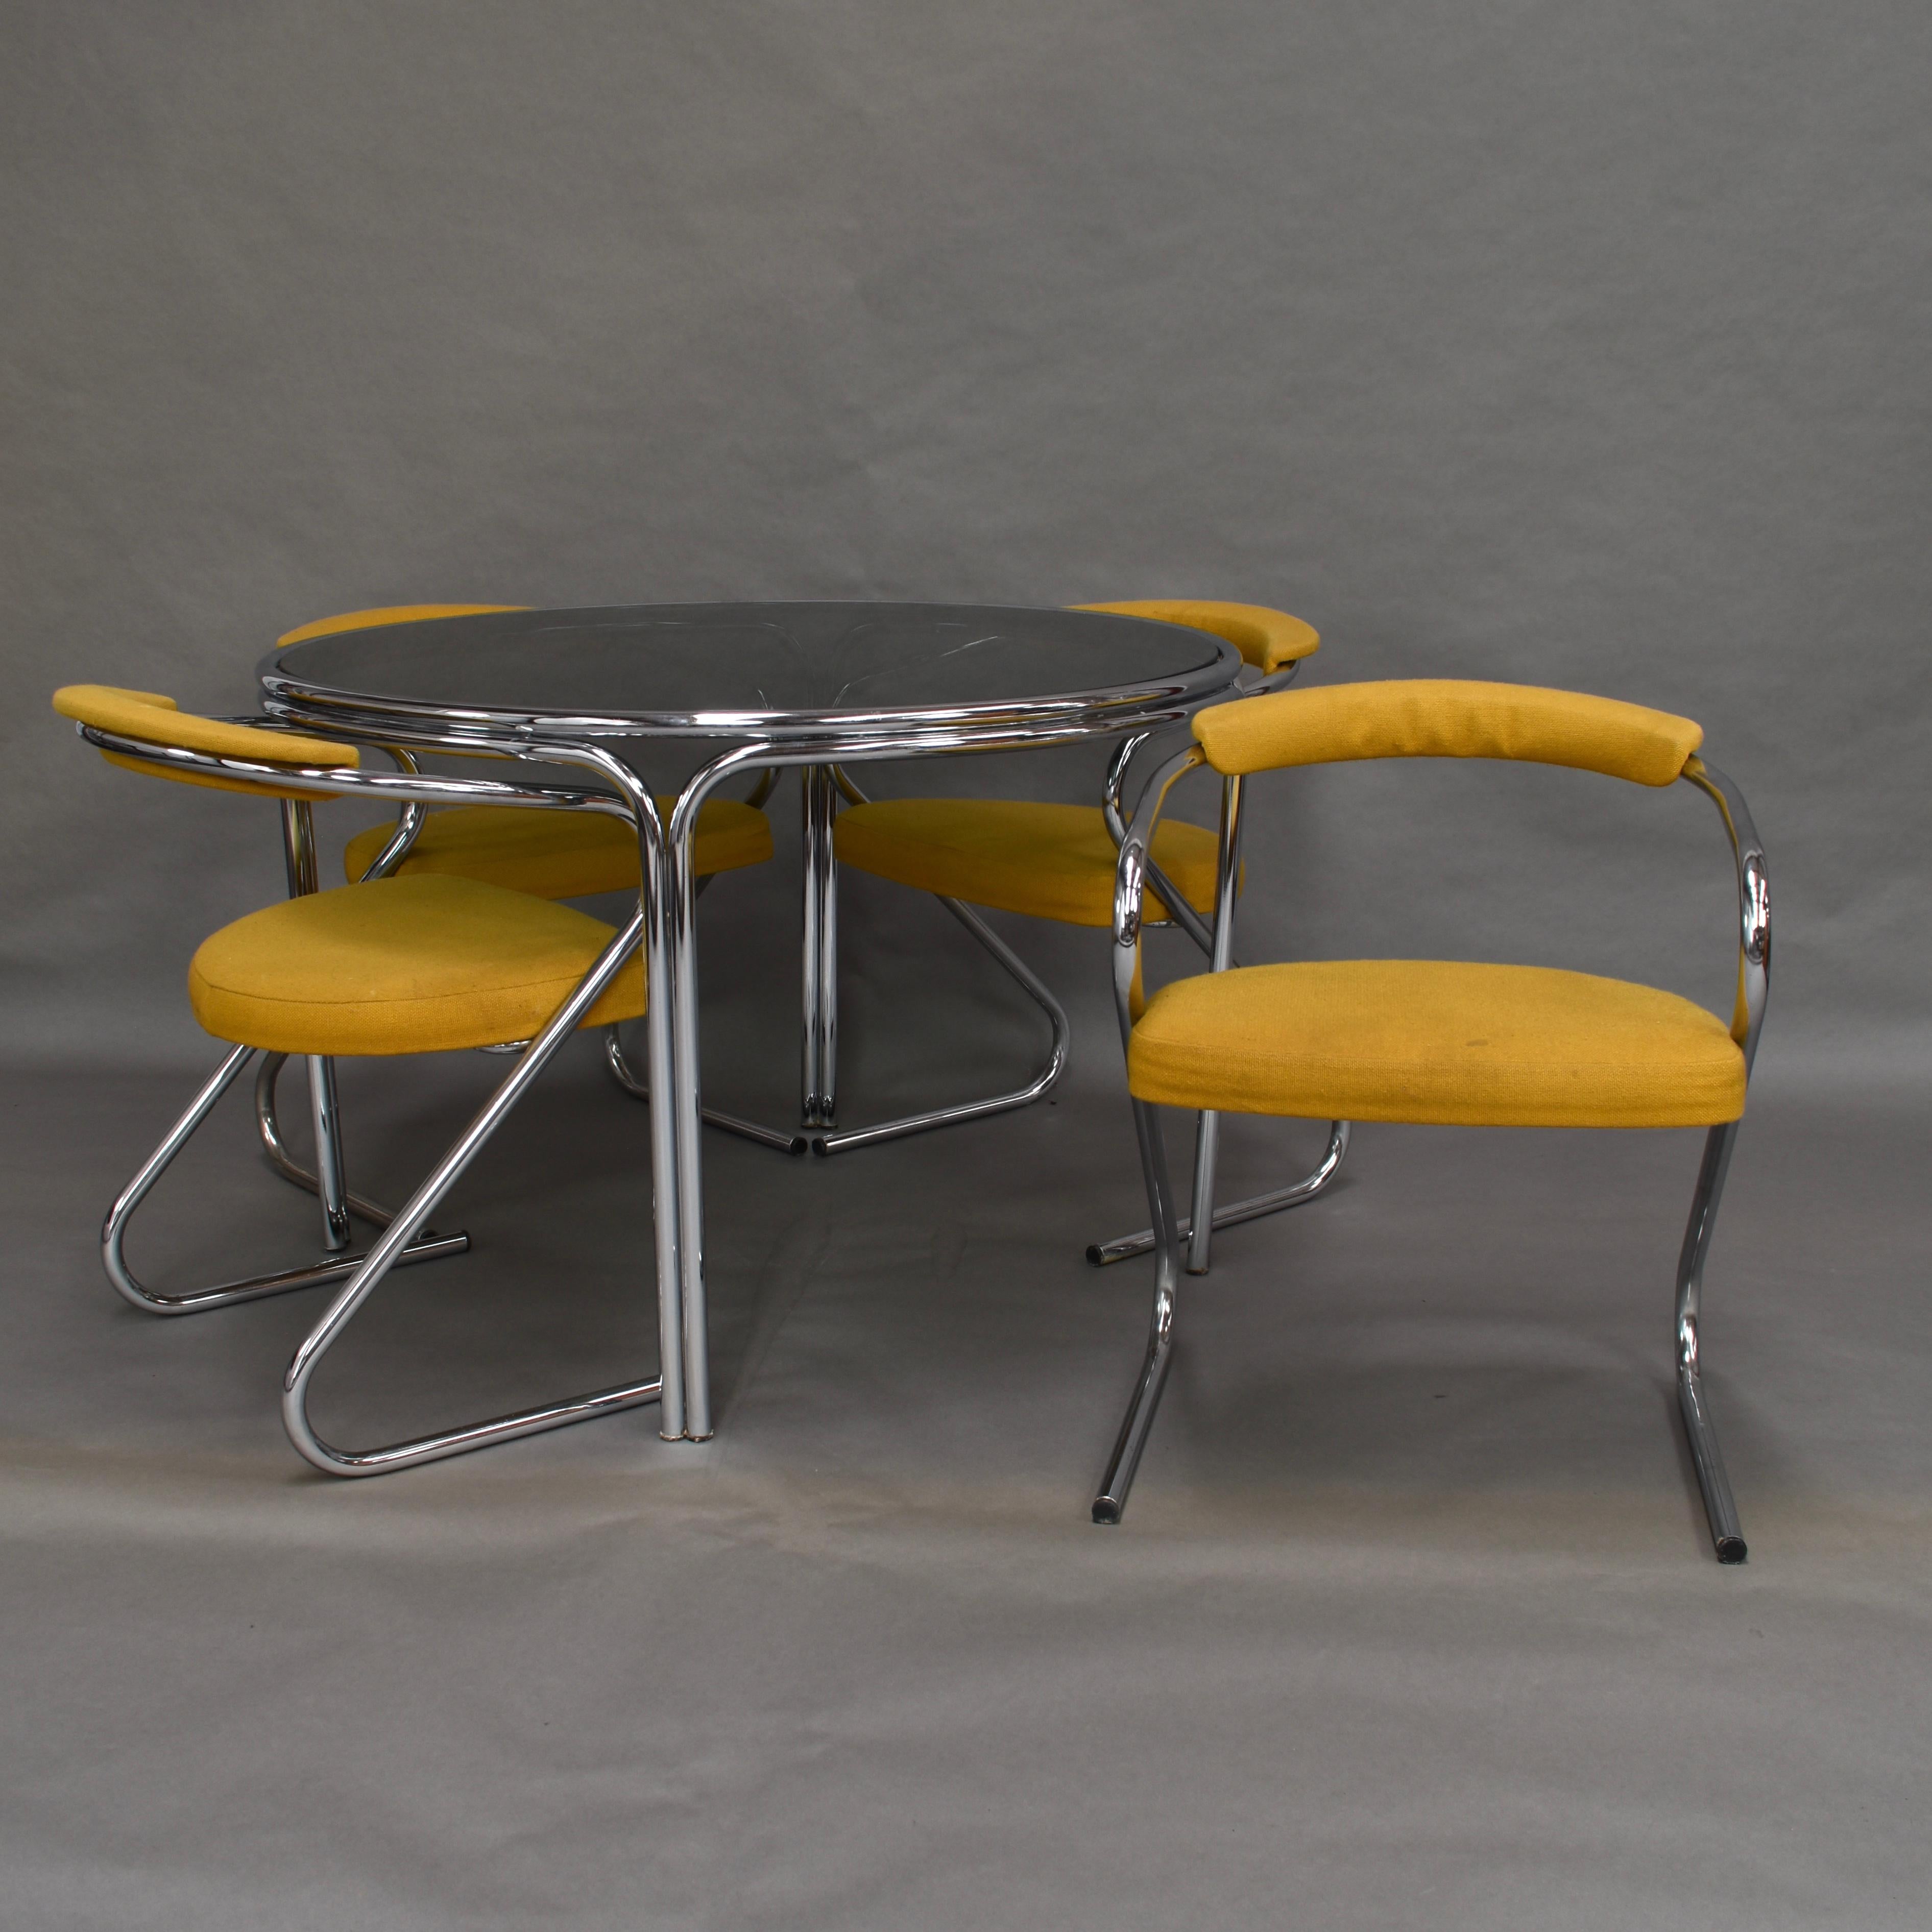 1970s dining table and chairs